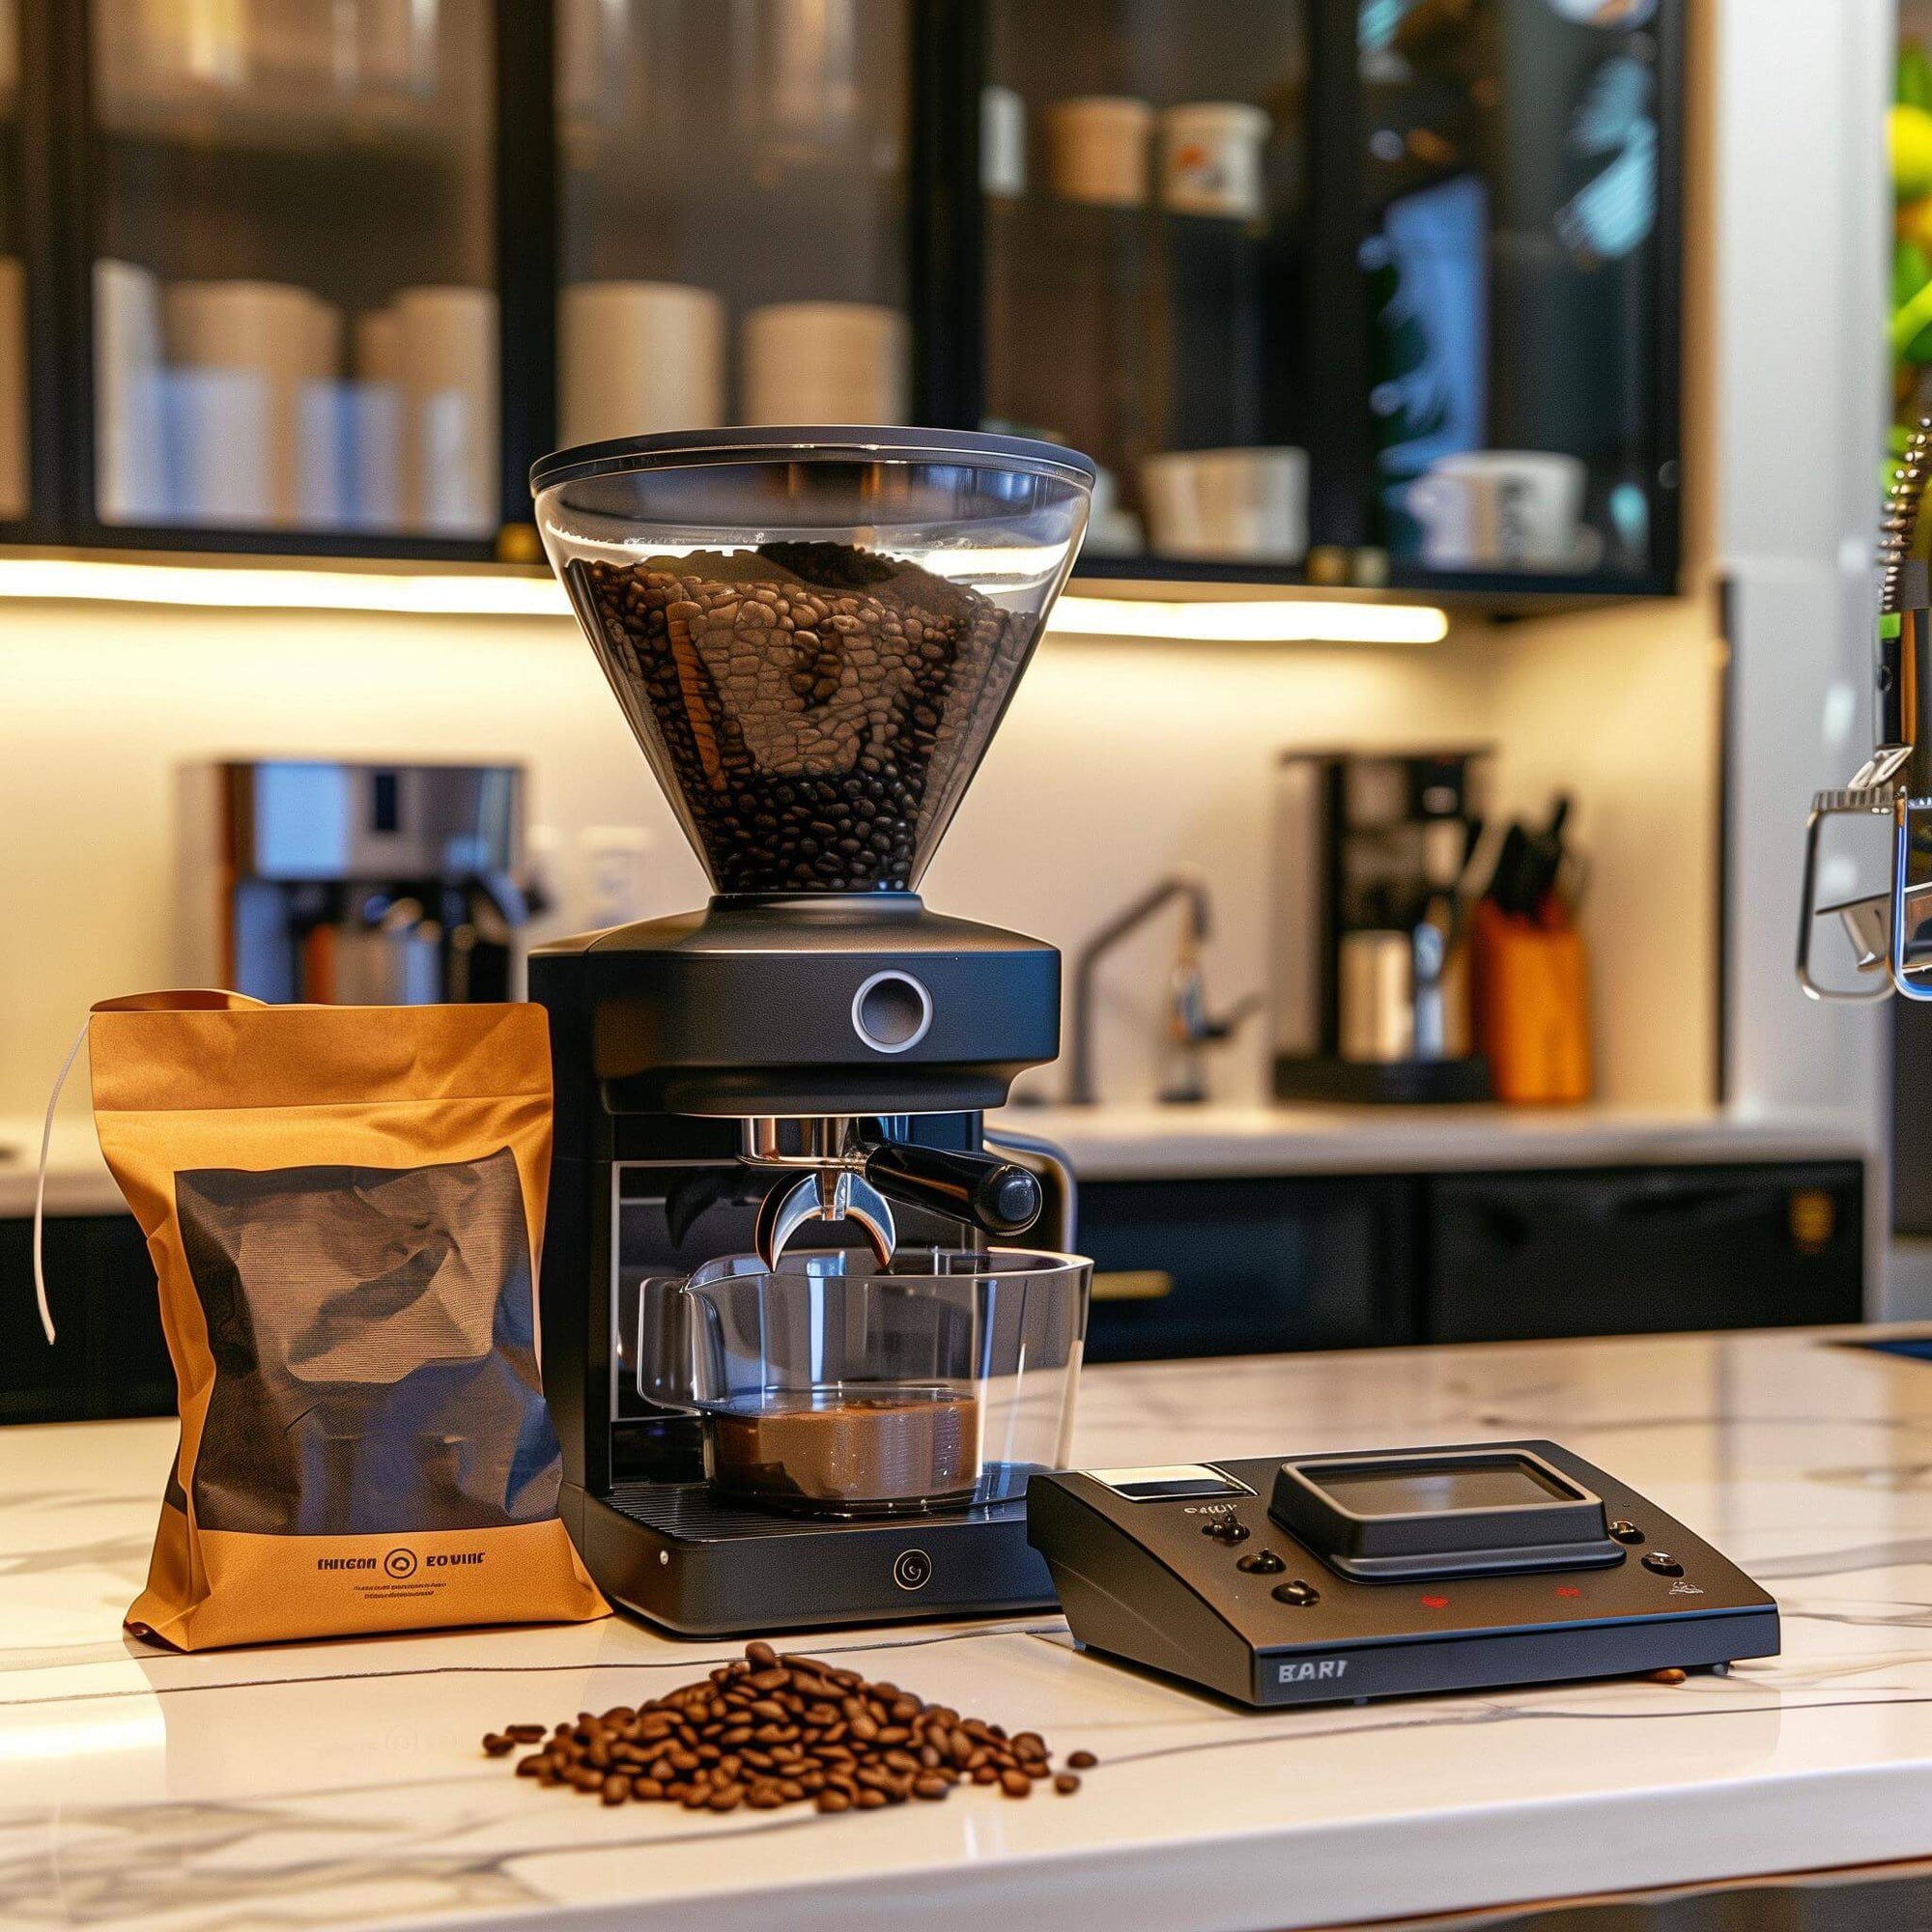 Coffee essentials: beans, burr grinder, and measuring scale